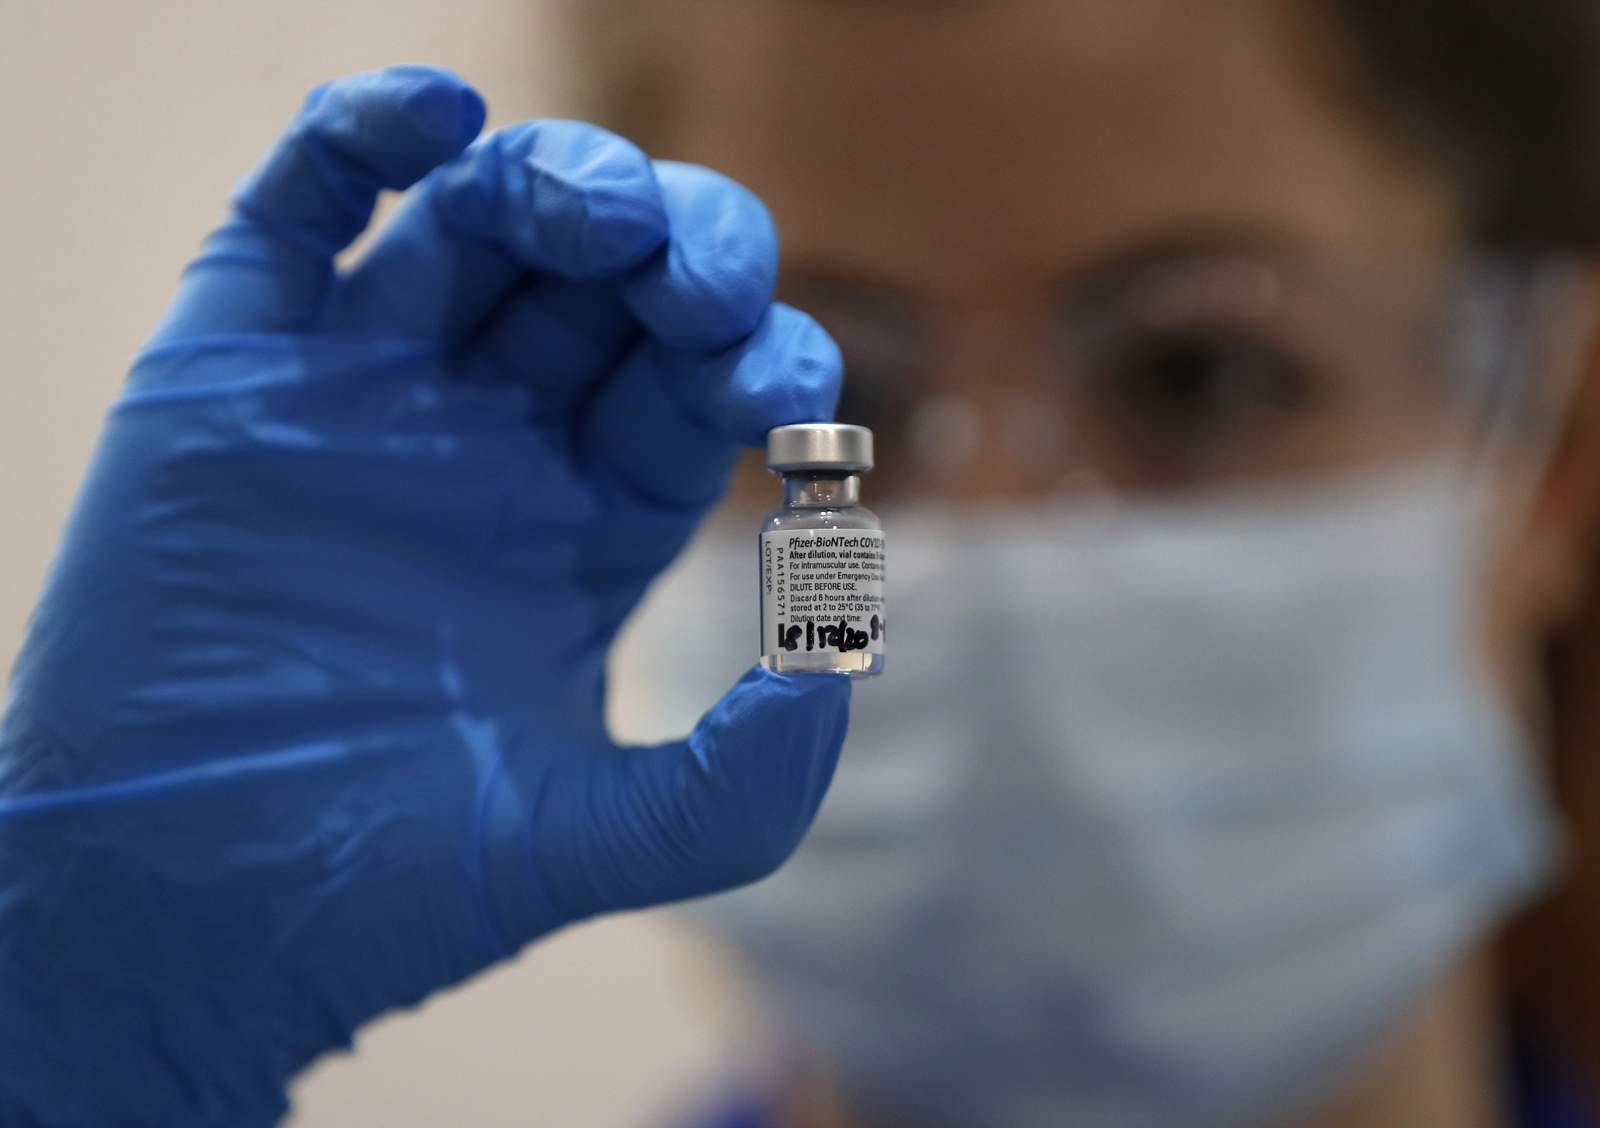 Survey shows Texans’ confidence in COVID-19 vaccine nearly doubled in recent months